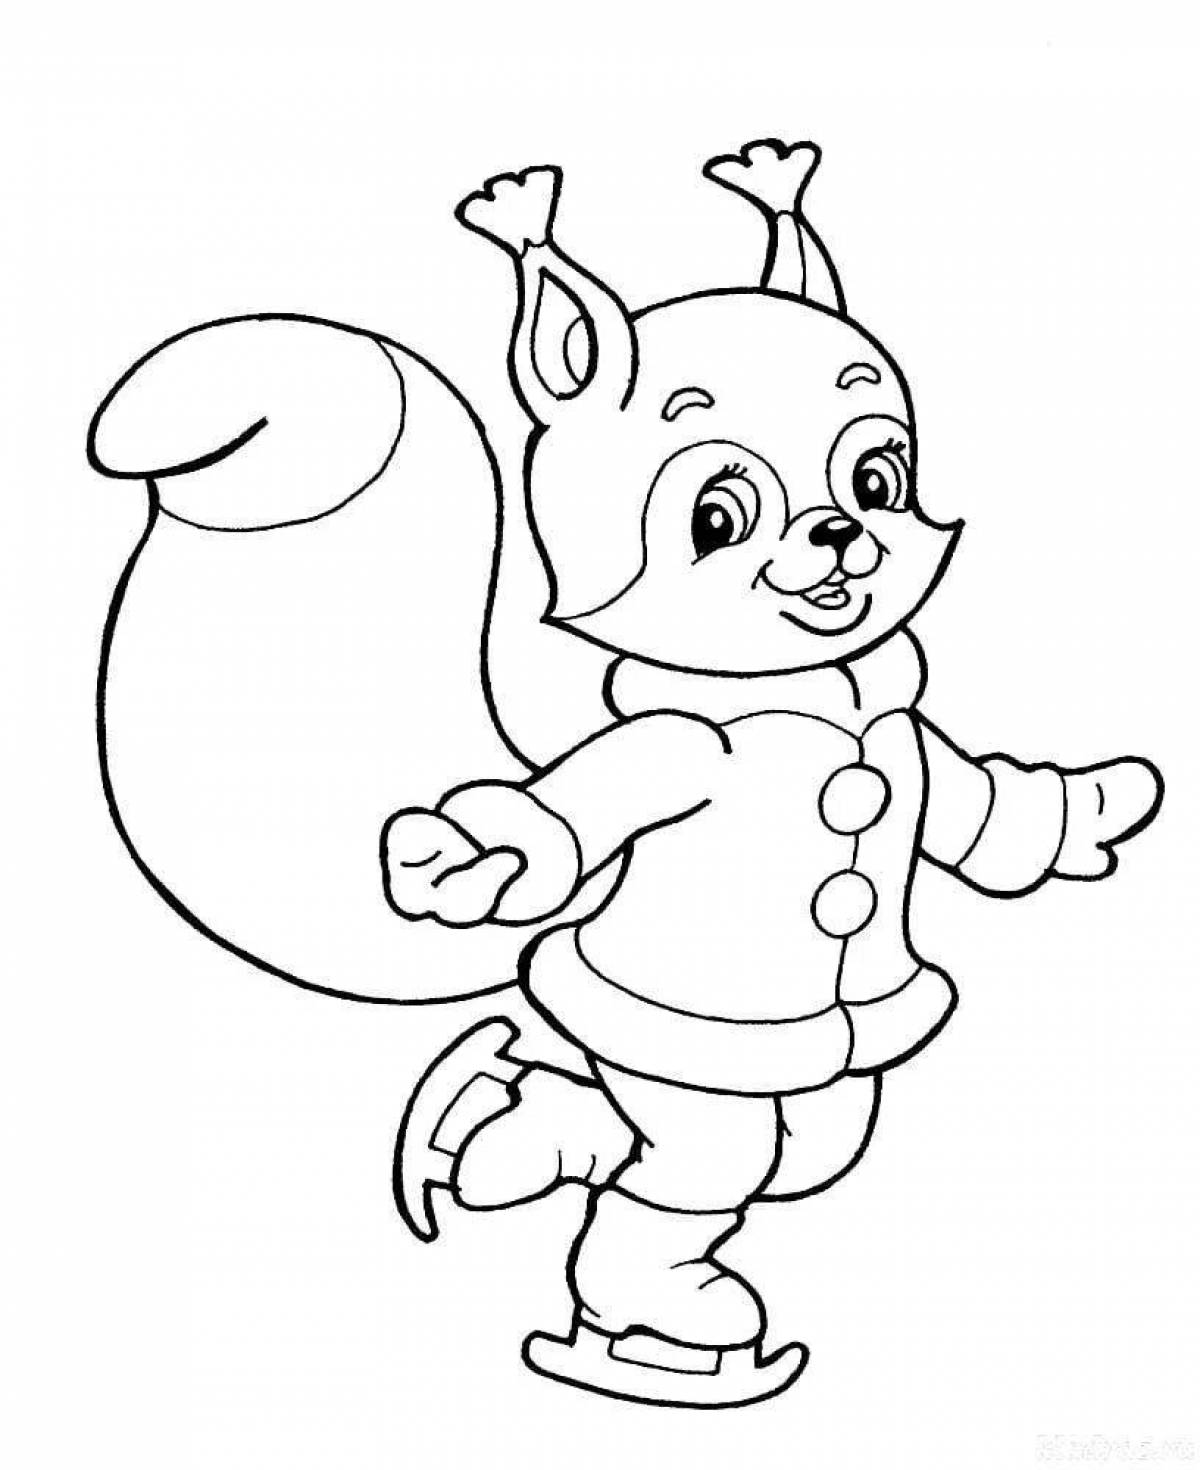 Cheerful little squirrel coloring book